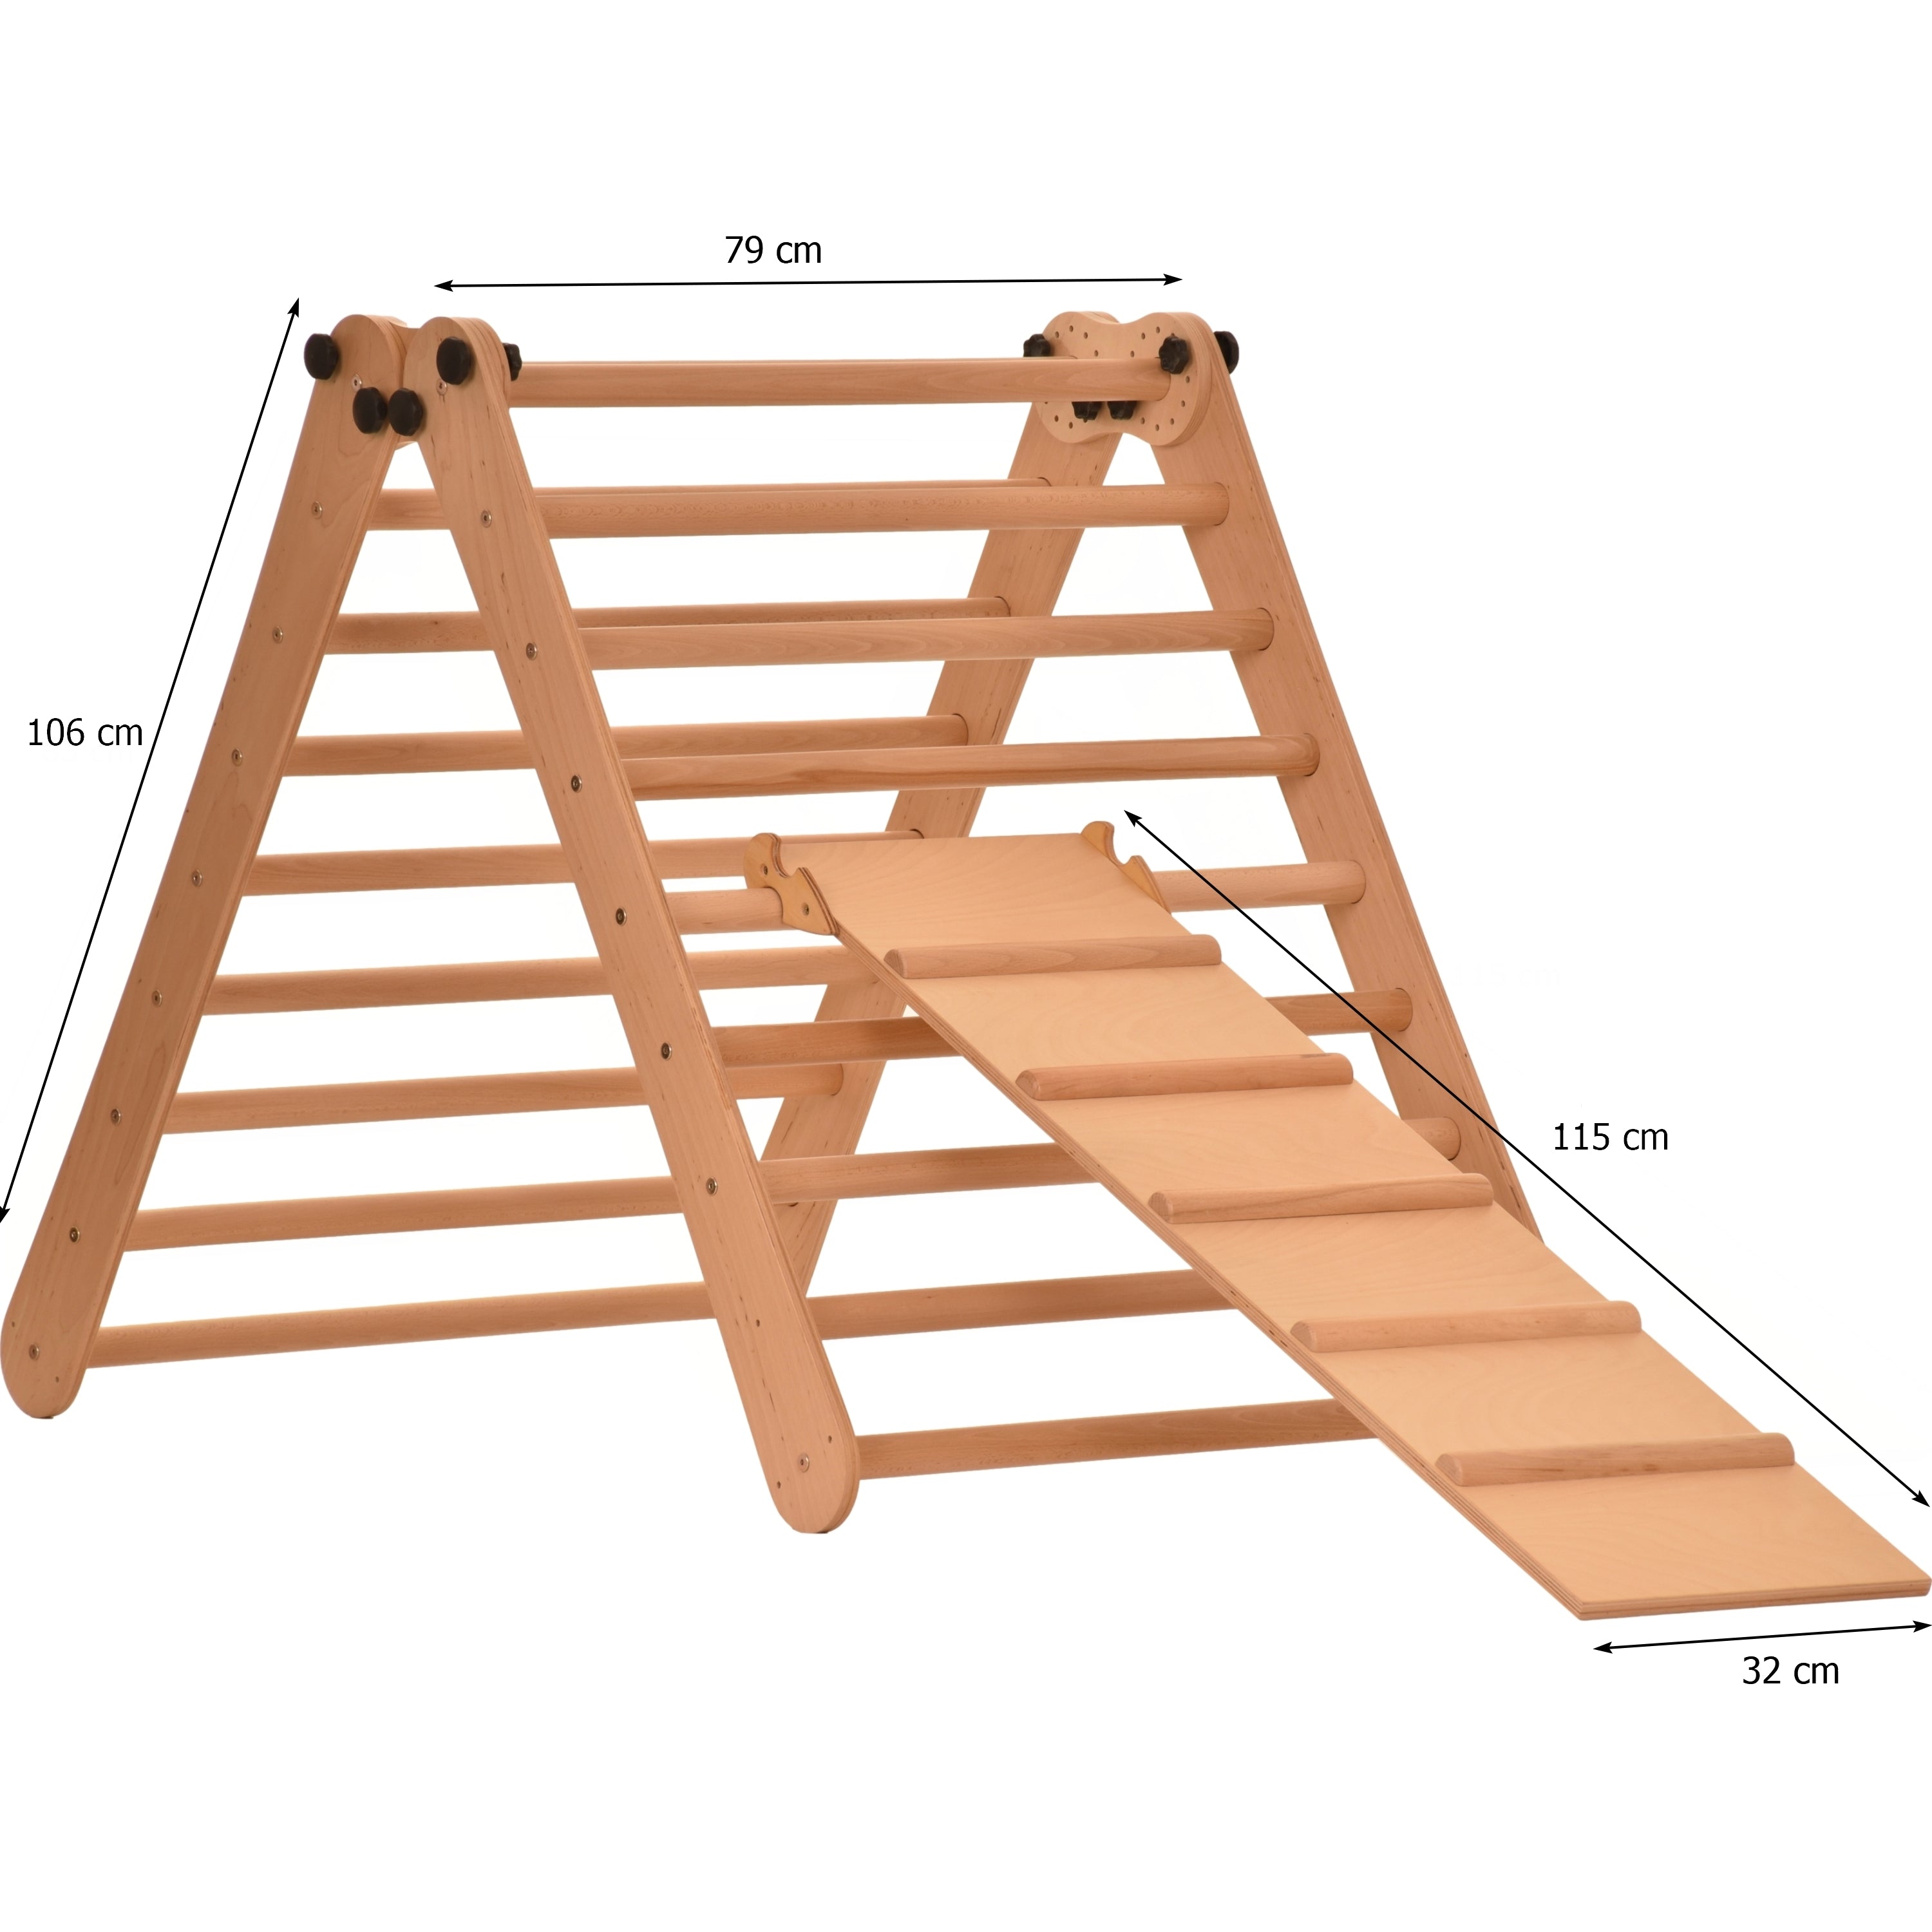 Rinagym Climbing Triangle - Indoor ladder with slide - Collapsible